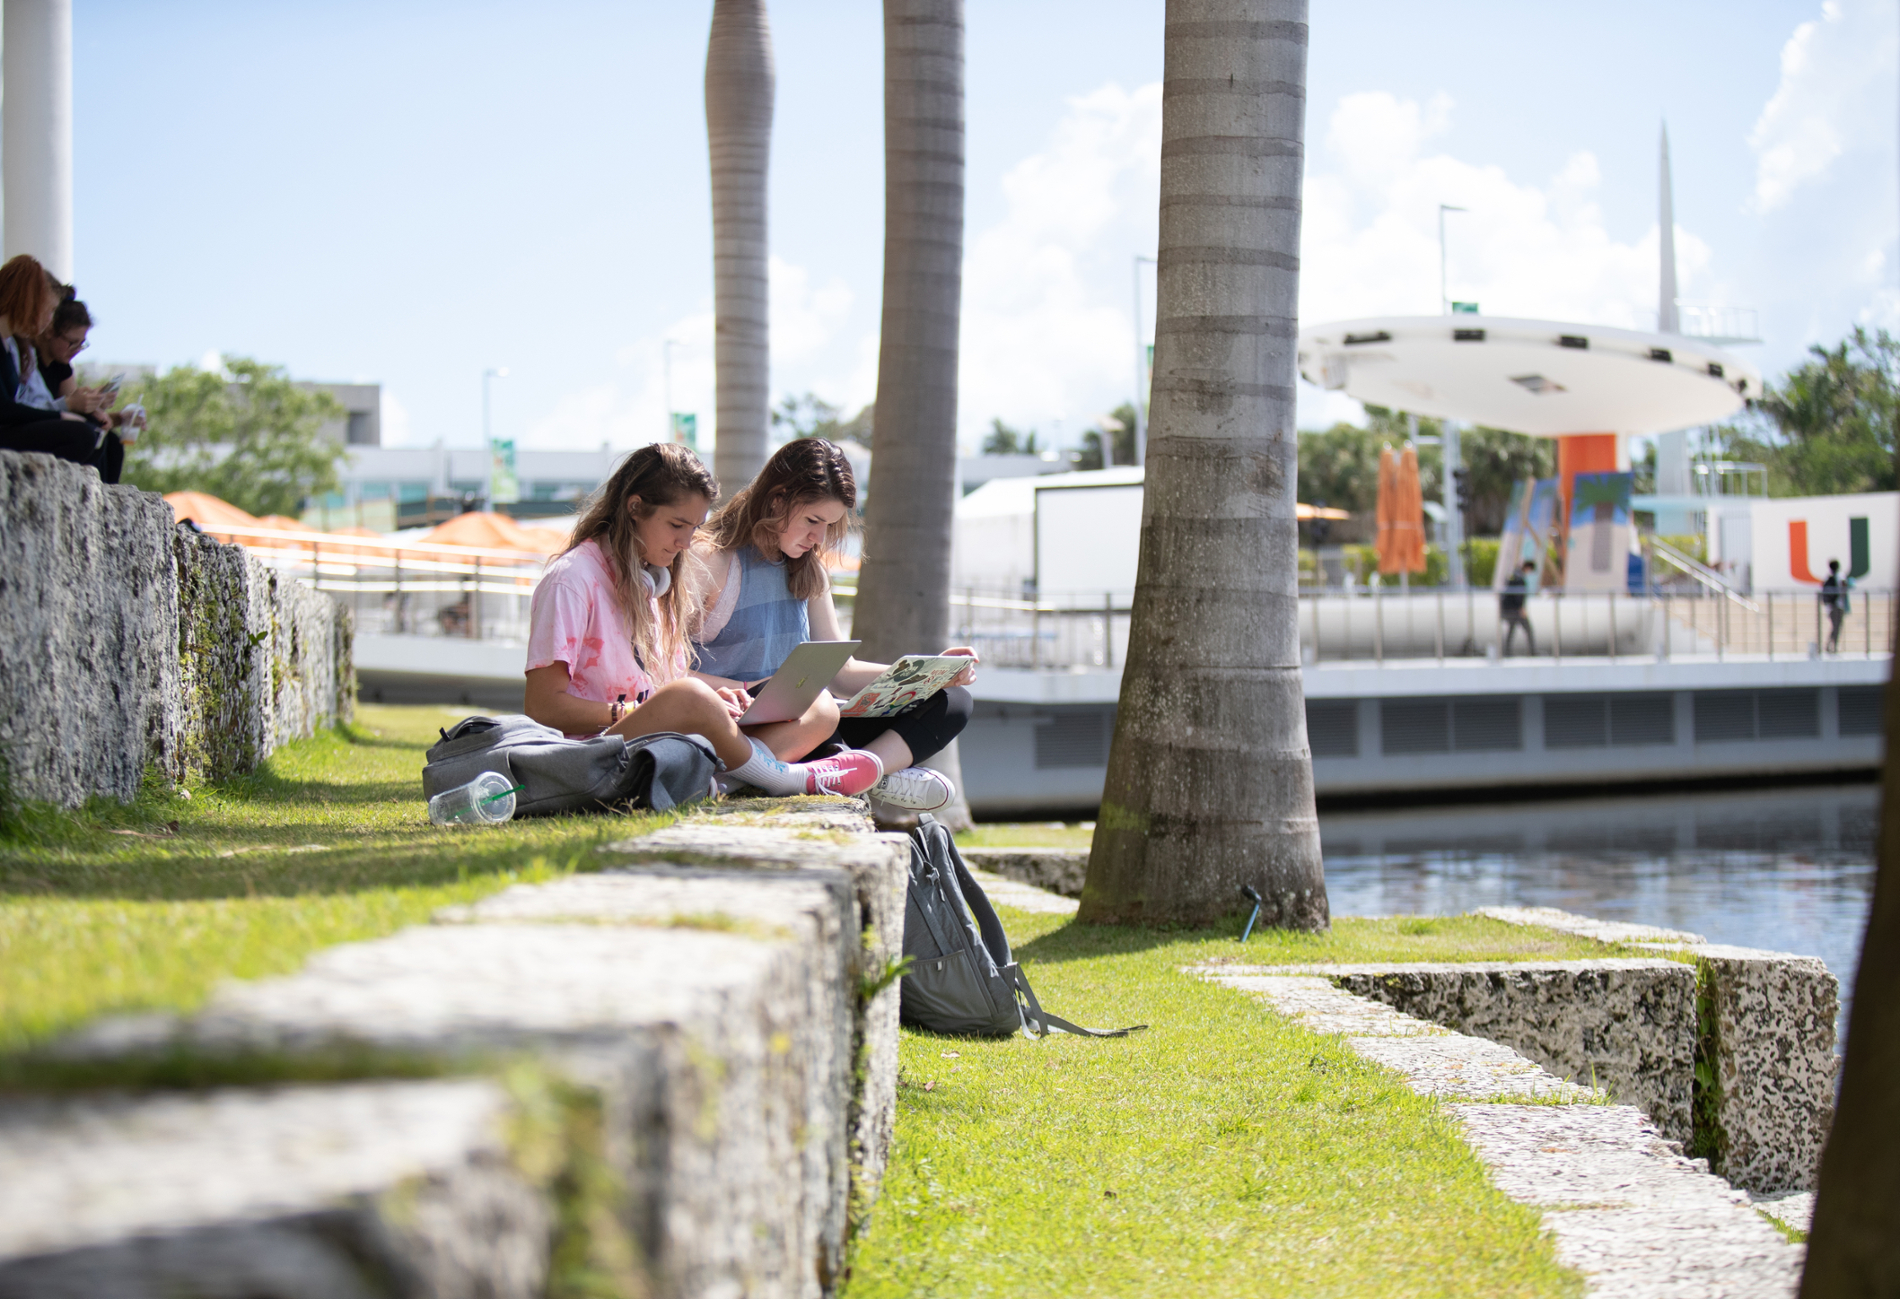 Students study on laptops by the lake